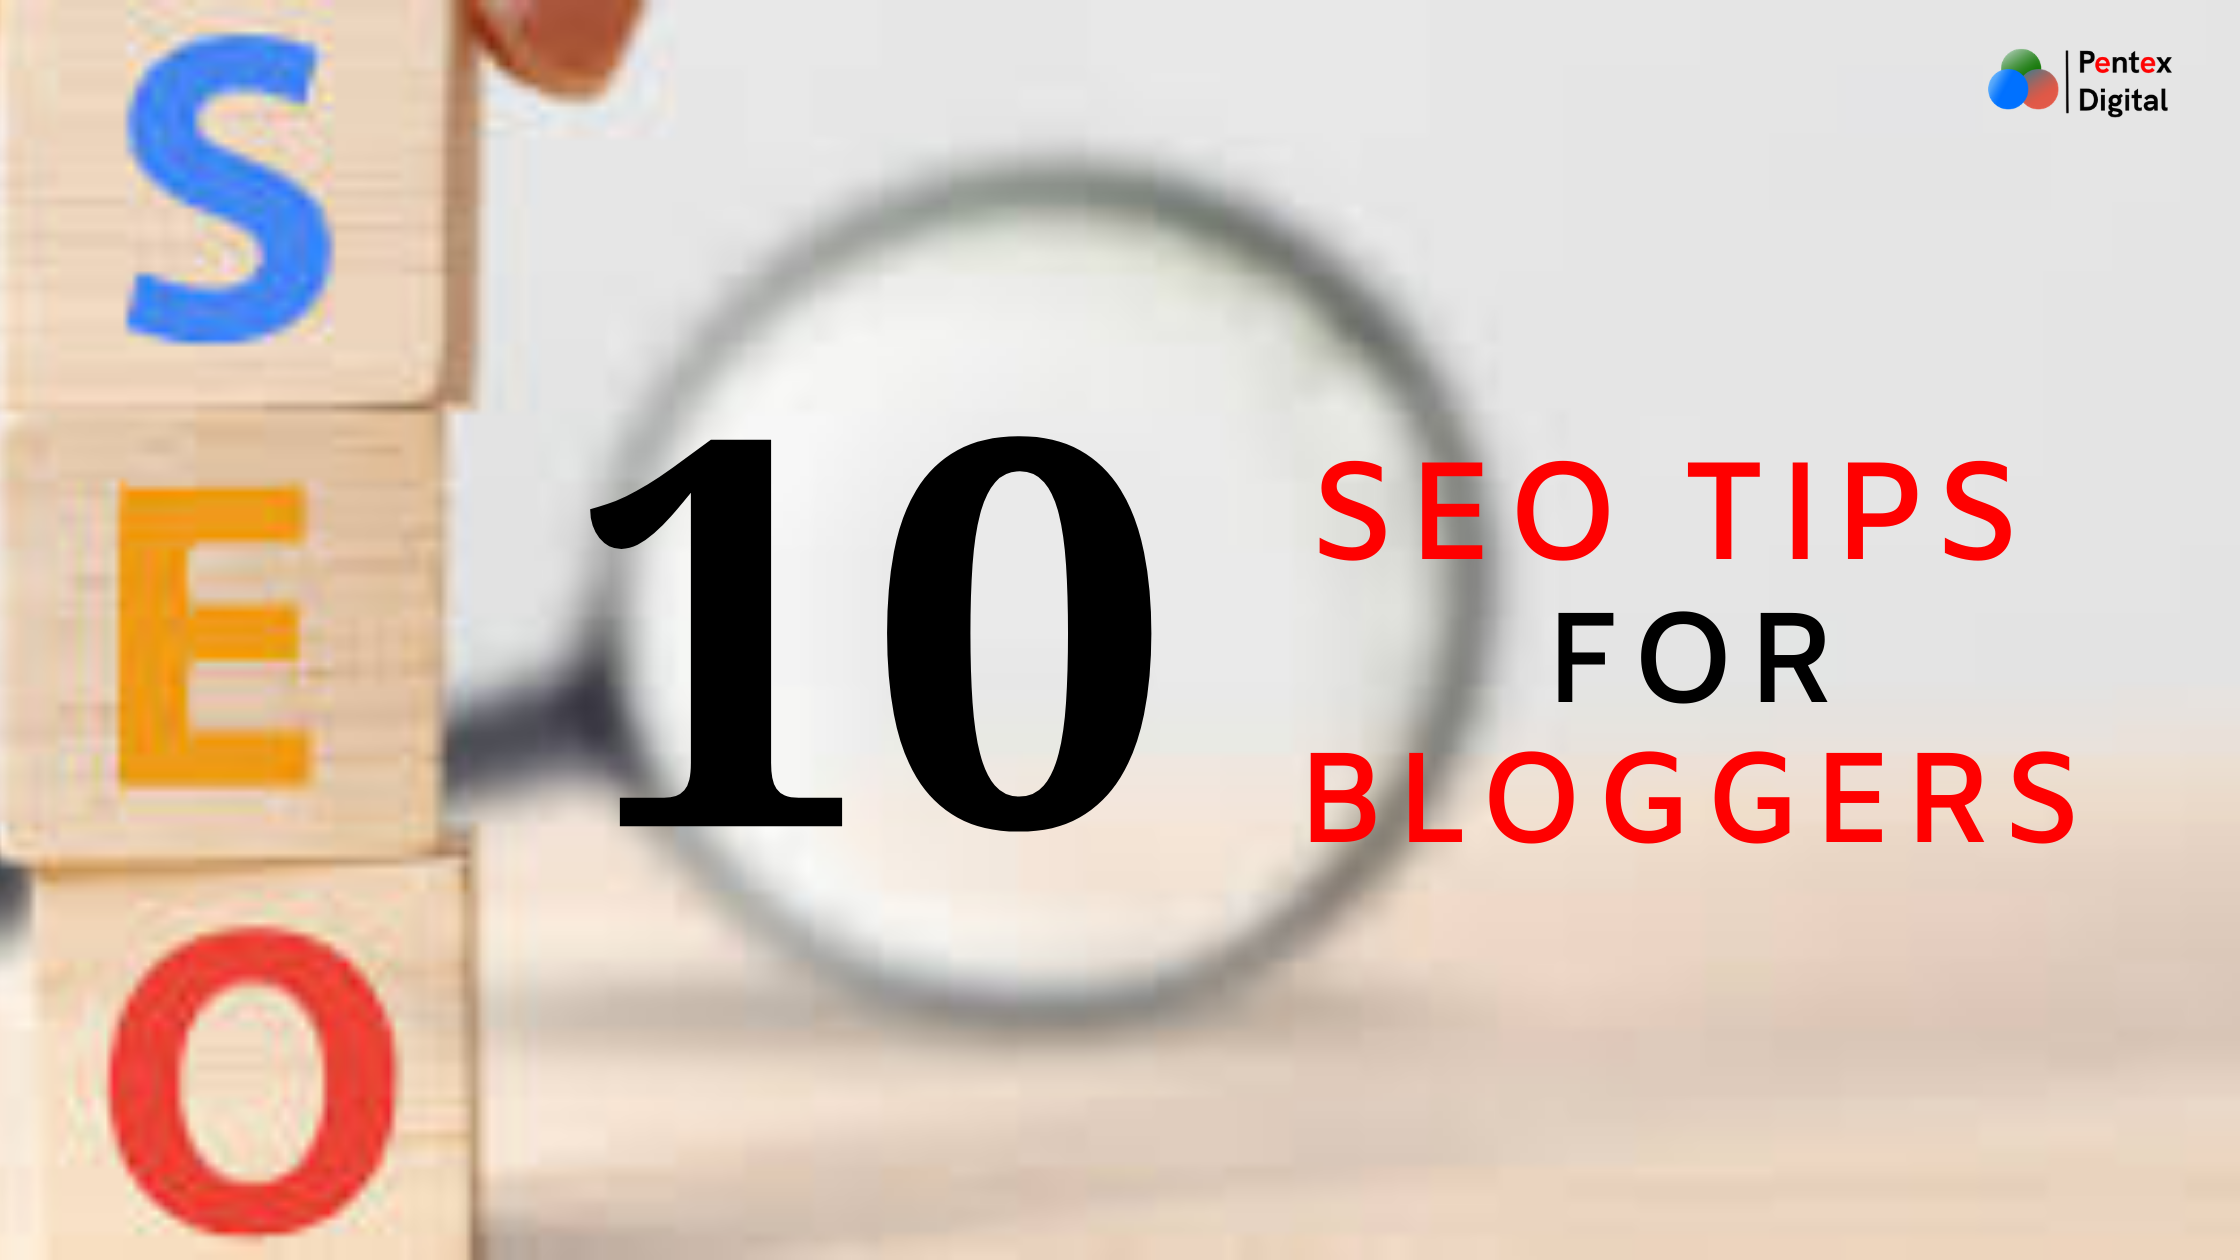 You are currently viewing 10 SEO Tips for Bloggers